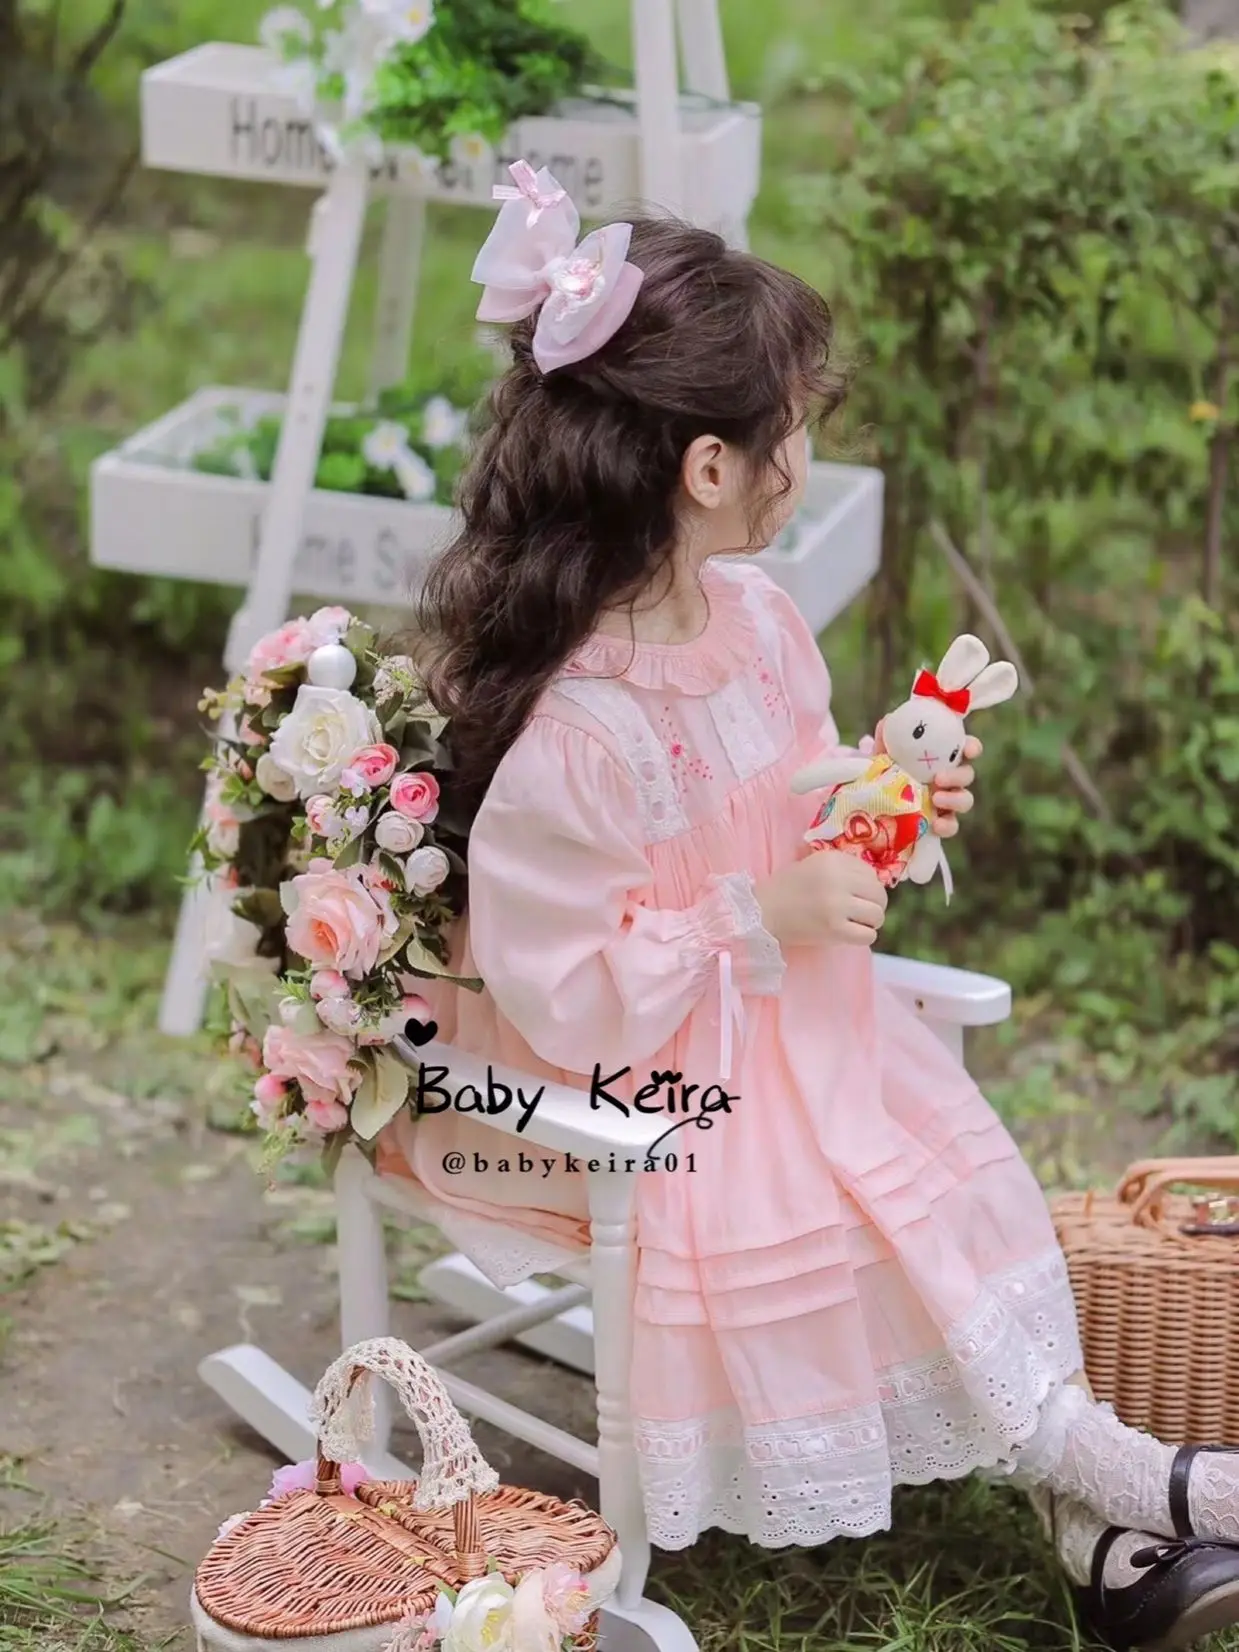 Pink Lace Girls Dress Princess Embroidery Flower Summer -  Israel